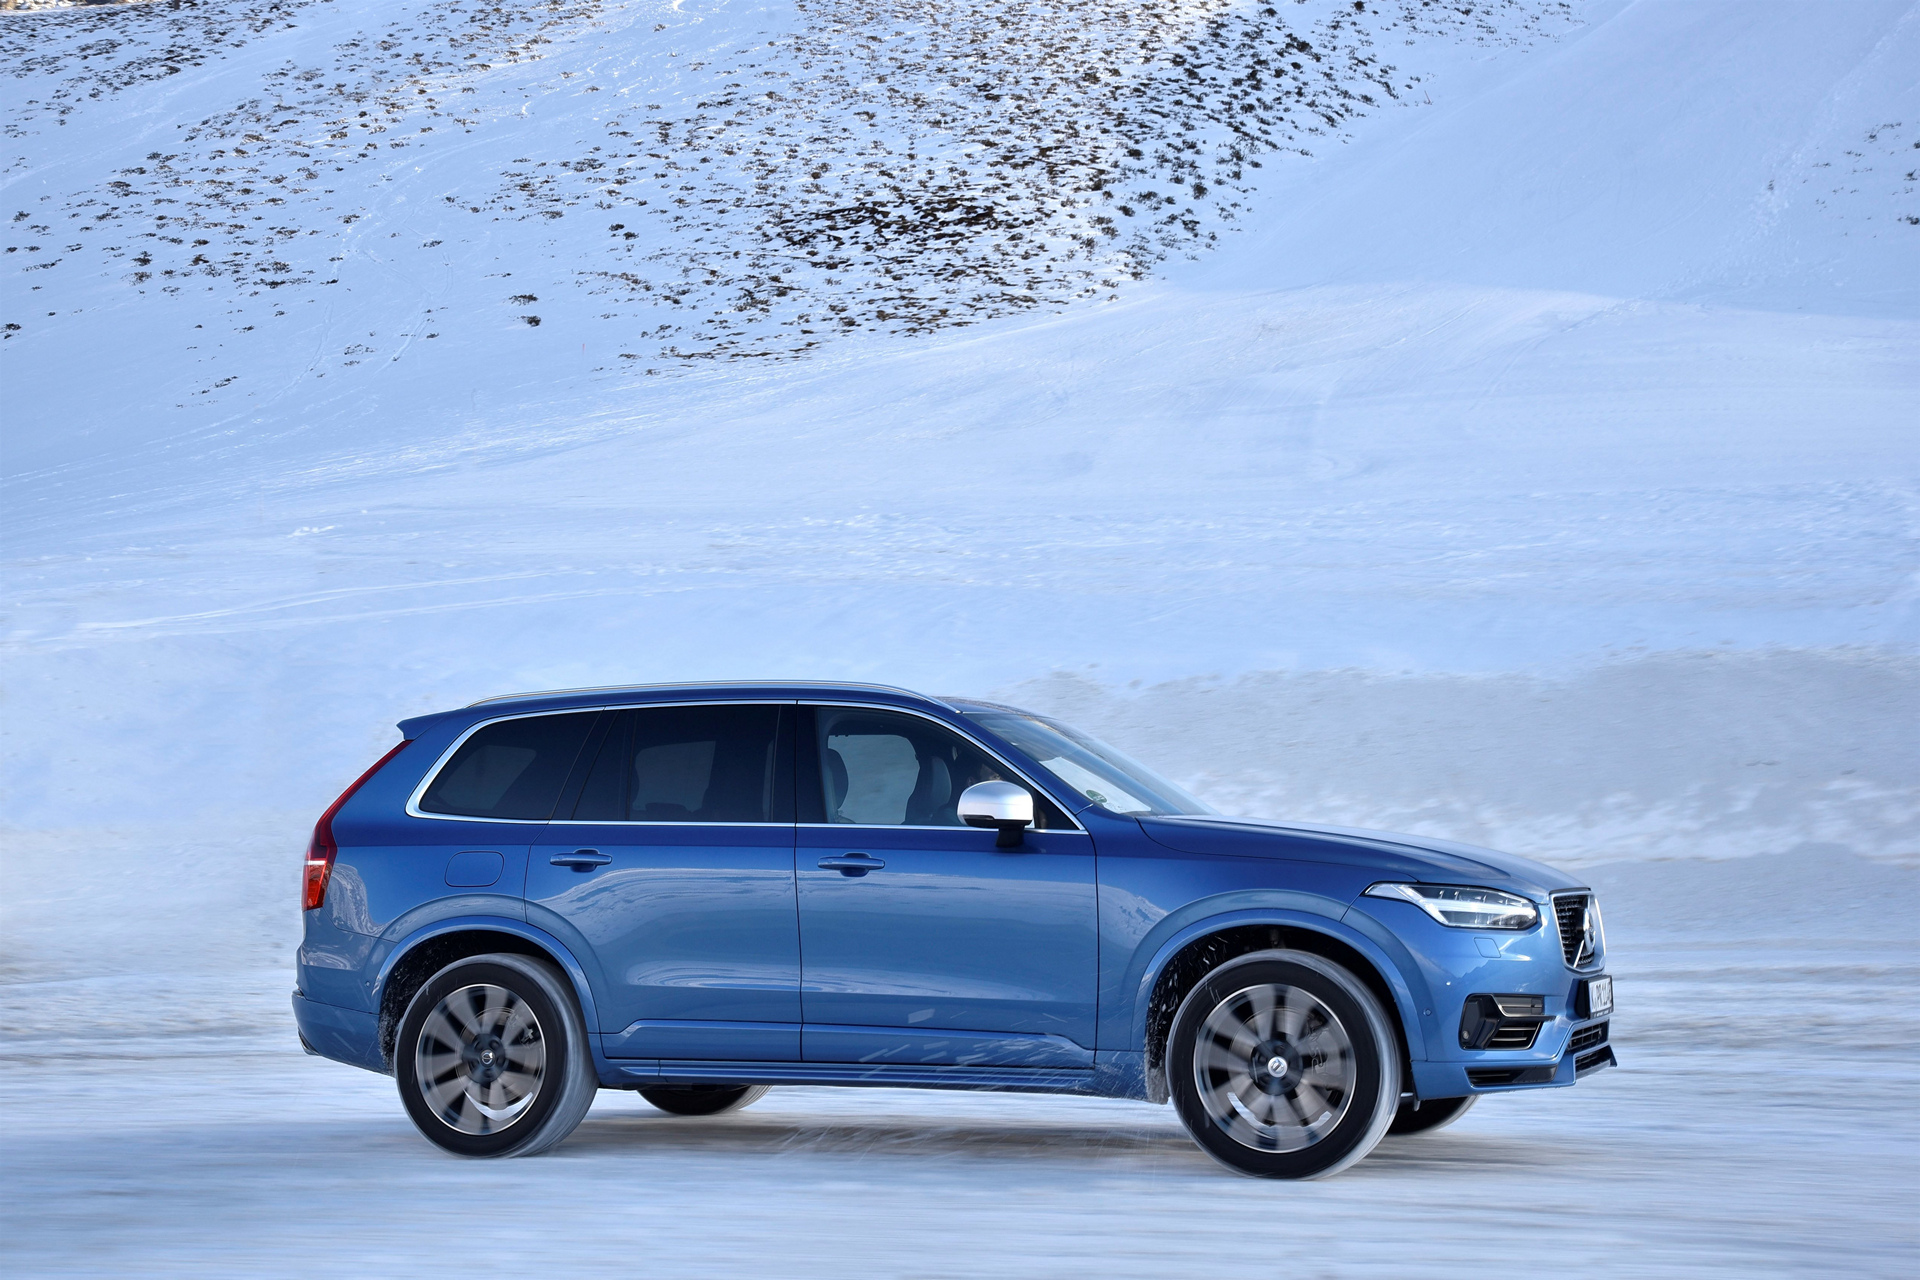 Volvo XC90 T8 © Zhejiang Geely Holding Group Co., Ltd